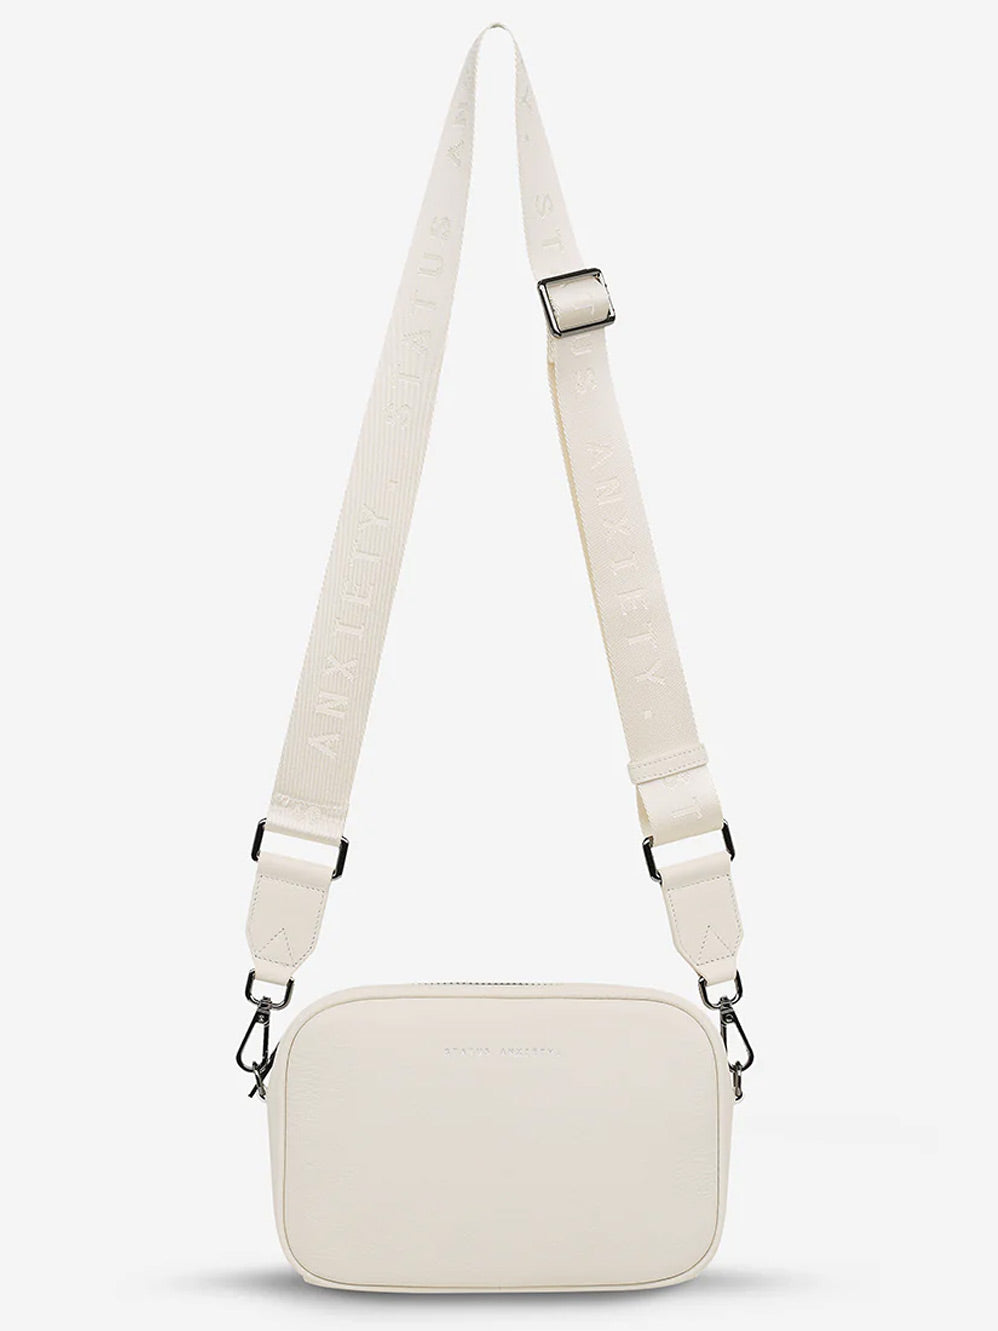 STATUS ANXIETY PLUNDER BAG WITH WEBBED STRAP